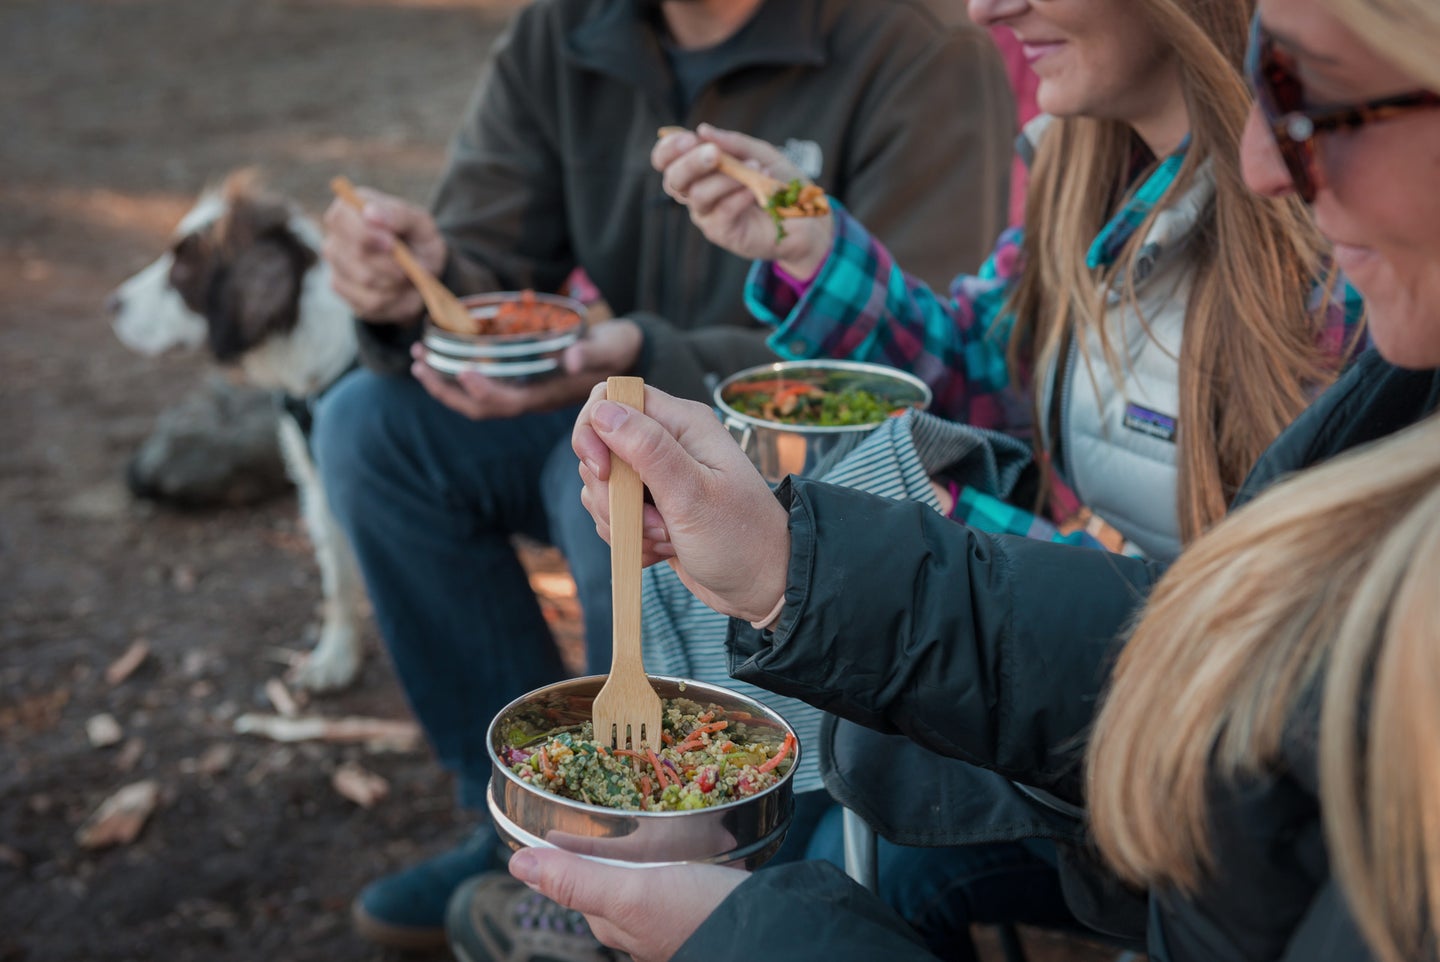 A group of people sit outside, eating a meal from stainless steel food containers using bamboo forks. A dog is in the background.